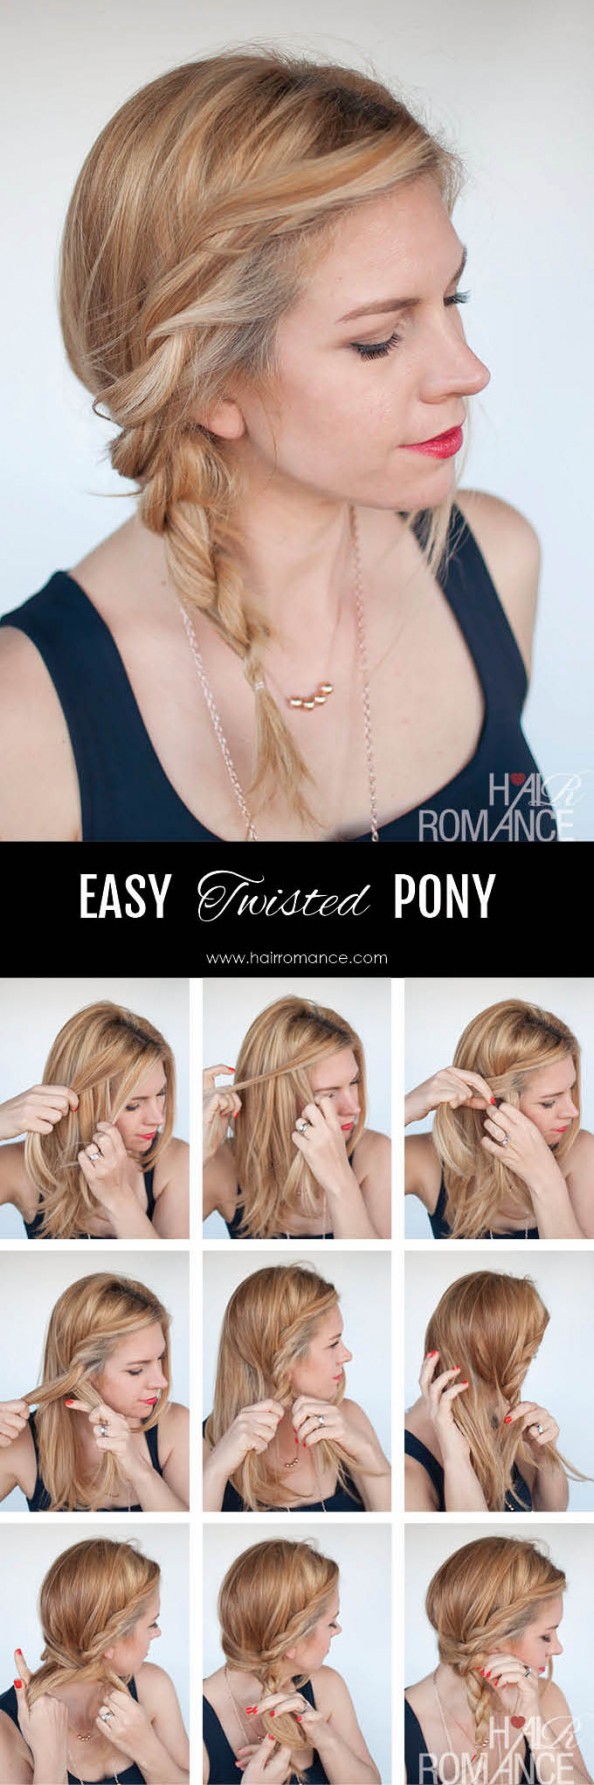 Hair Romance Easy Twisted Ponytail